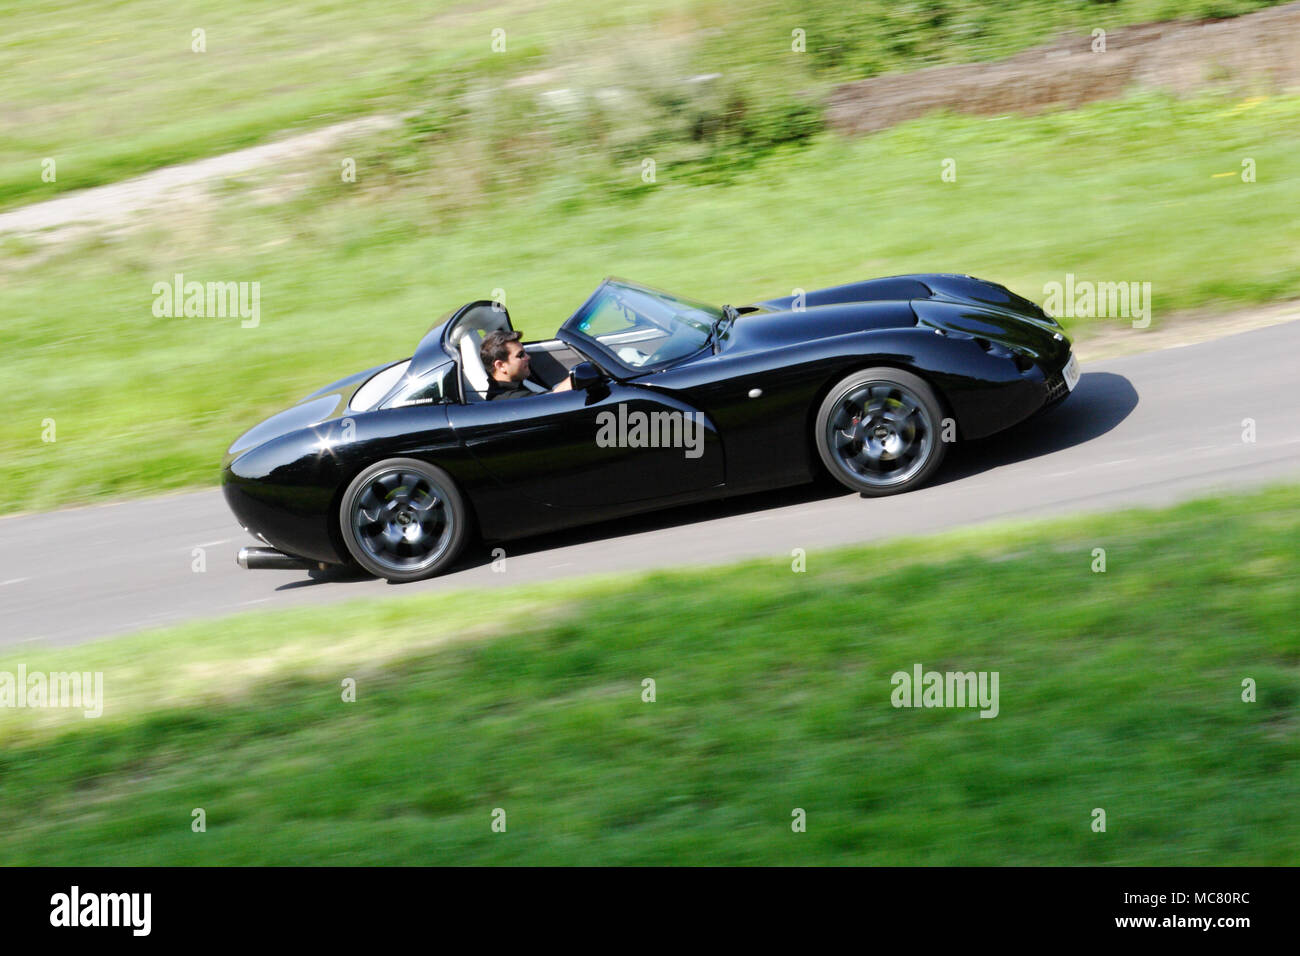 Black TVR Tuscan driving fast Stock Photo